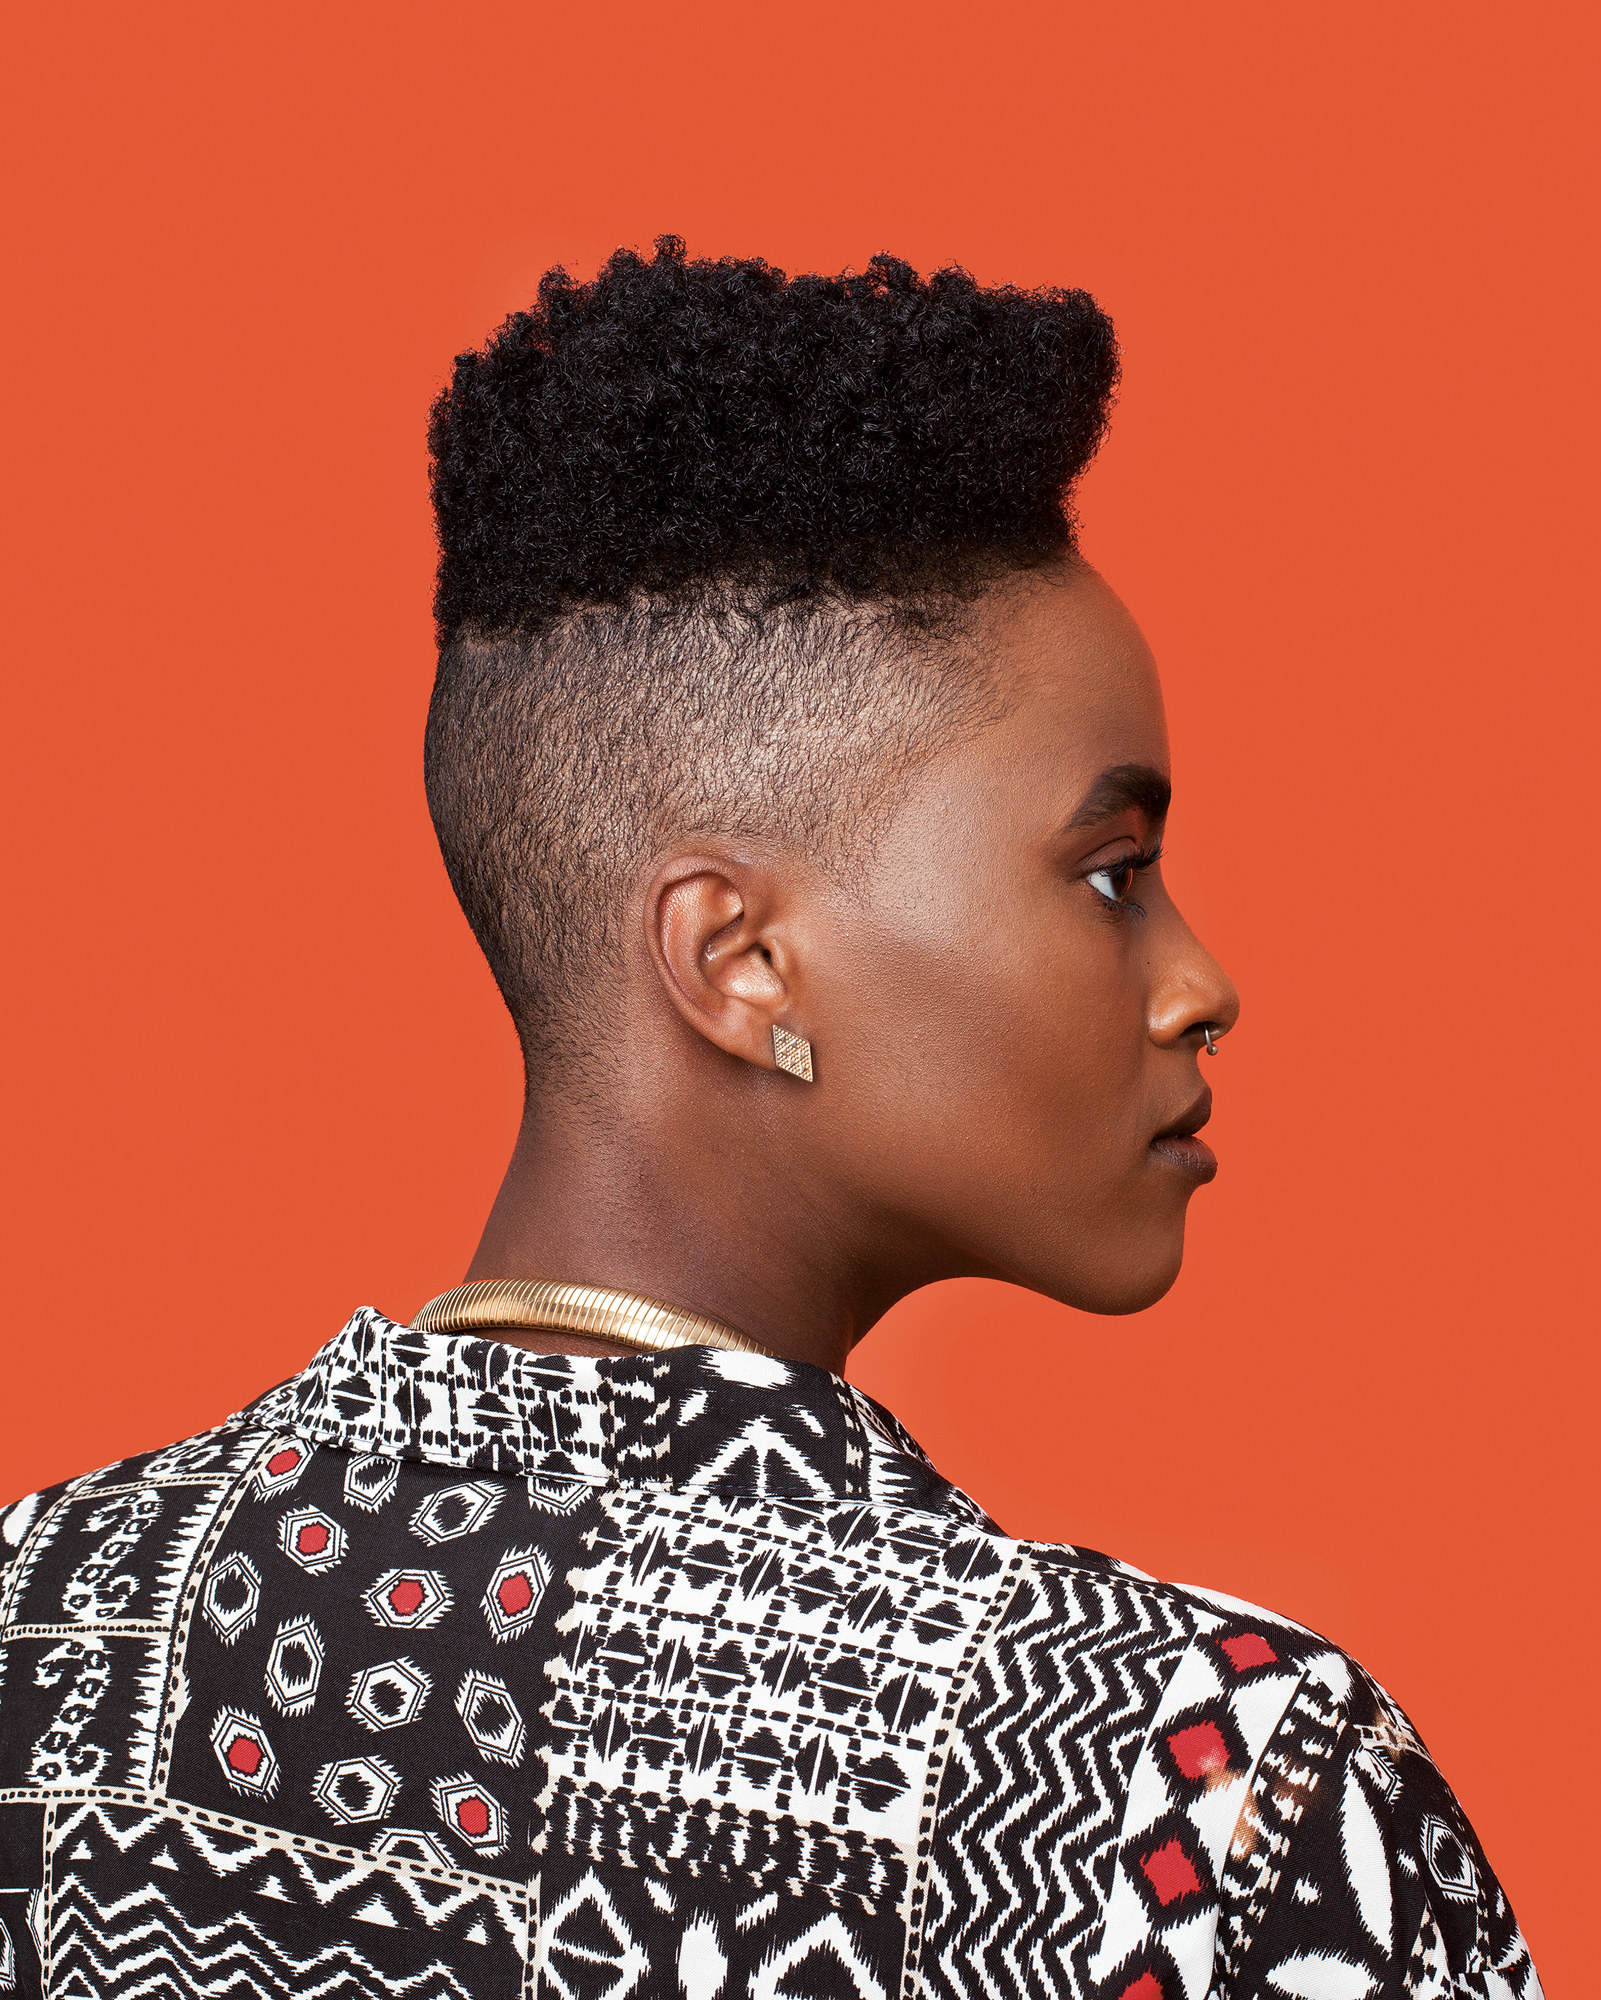 A side profile of a Black woman with great hair looks to the right against an orange background